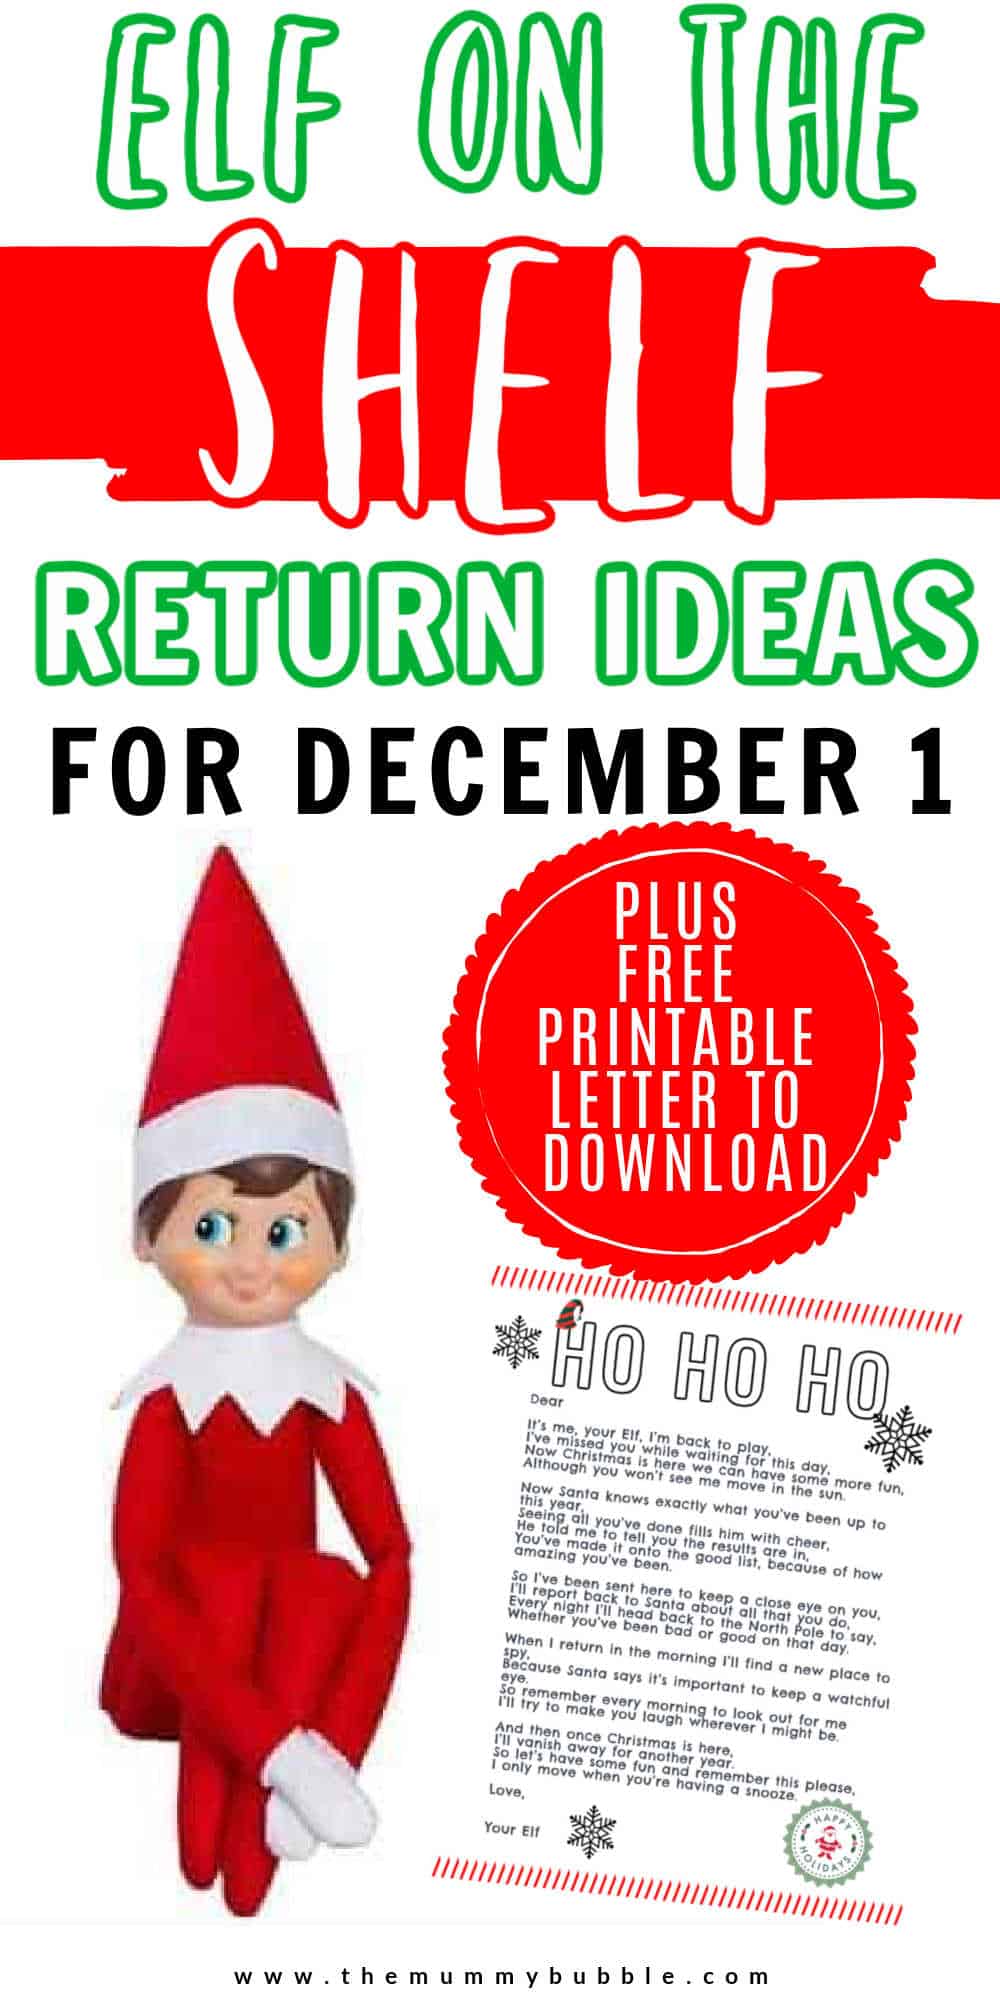 How to welcome back your Elf on the Shelf - The Mummy Bubble